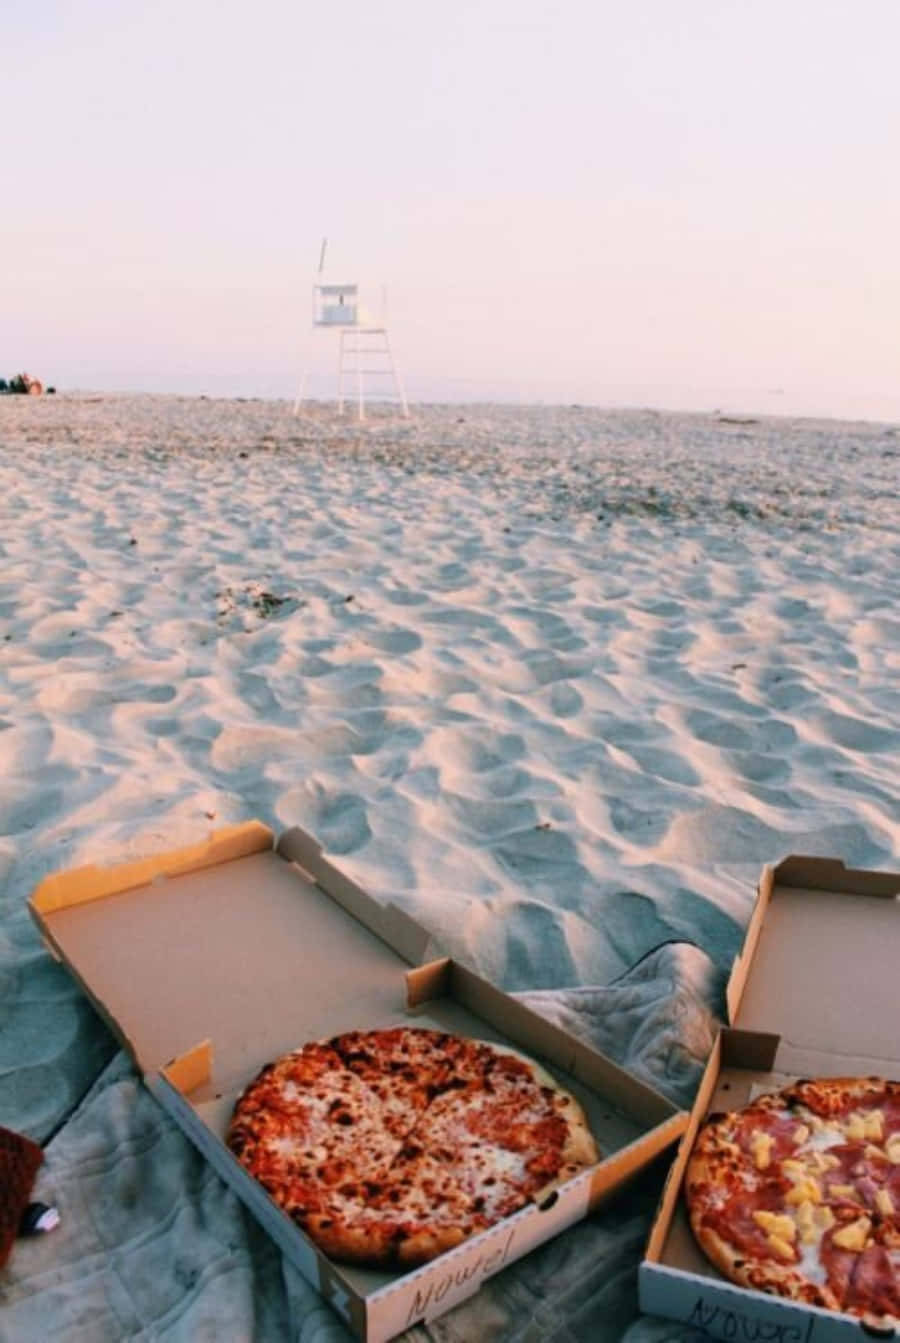 Two Pizza Boxes On The Beach